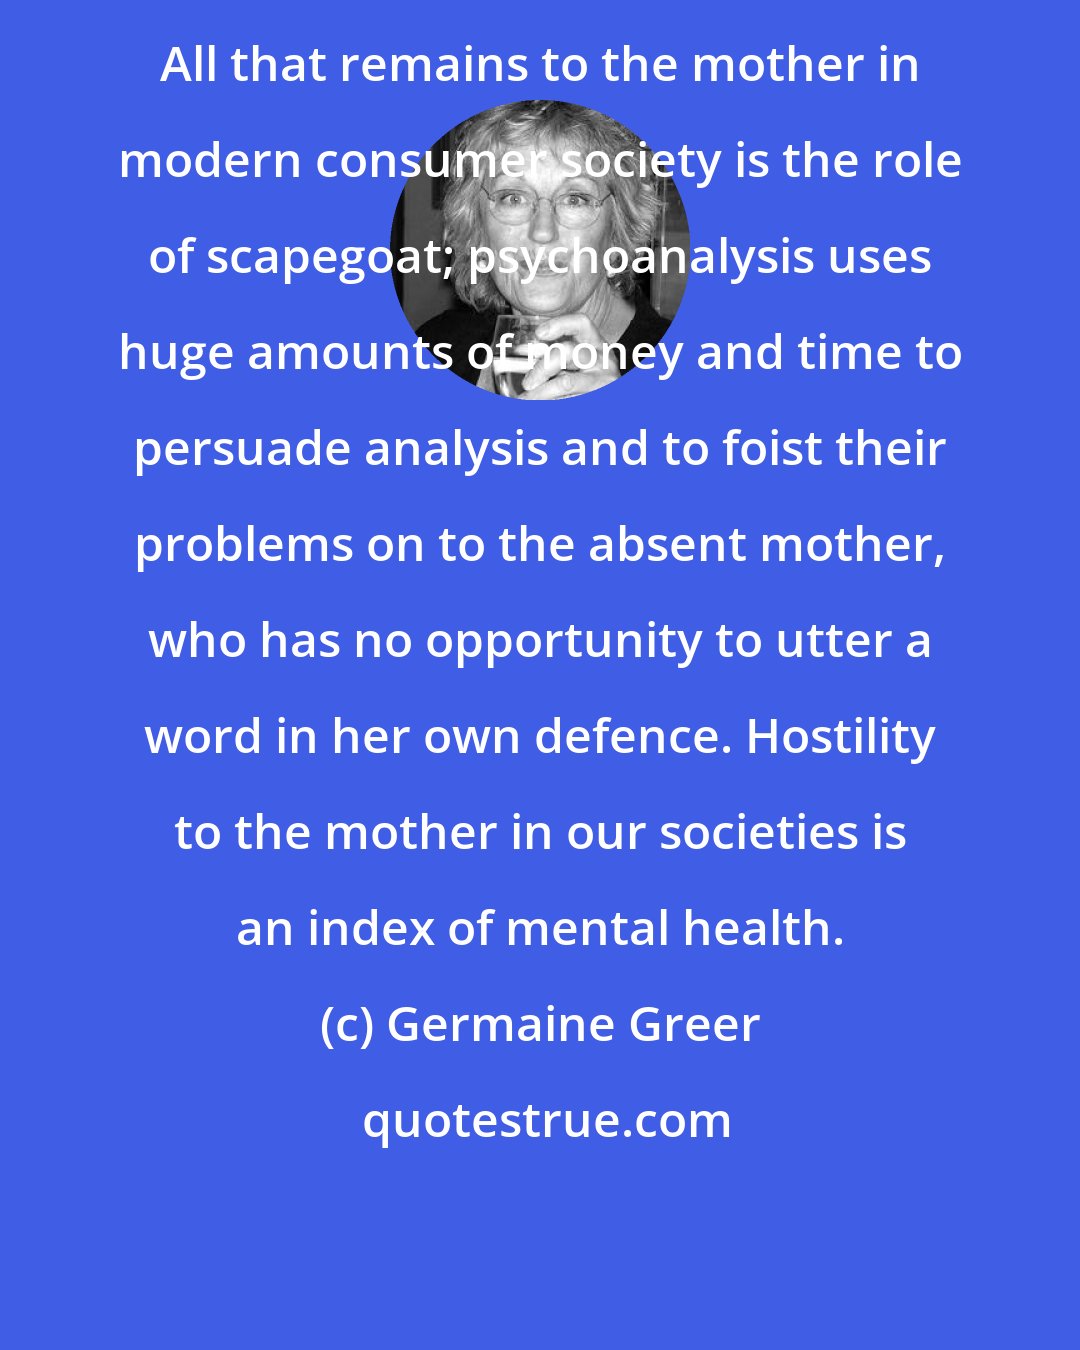 Germaine Greer: All that remains to the mother in modern consumer society is the role of scapegoat; psychoanalysis uses huge amounts of money and time to persuade analysis and to foist their problems on to the absent mother, who has no opportunity to utter a word in her own defence. Hostility to the mother in our societies is an index of mental health.